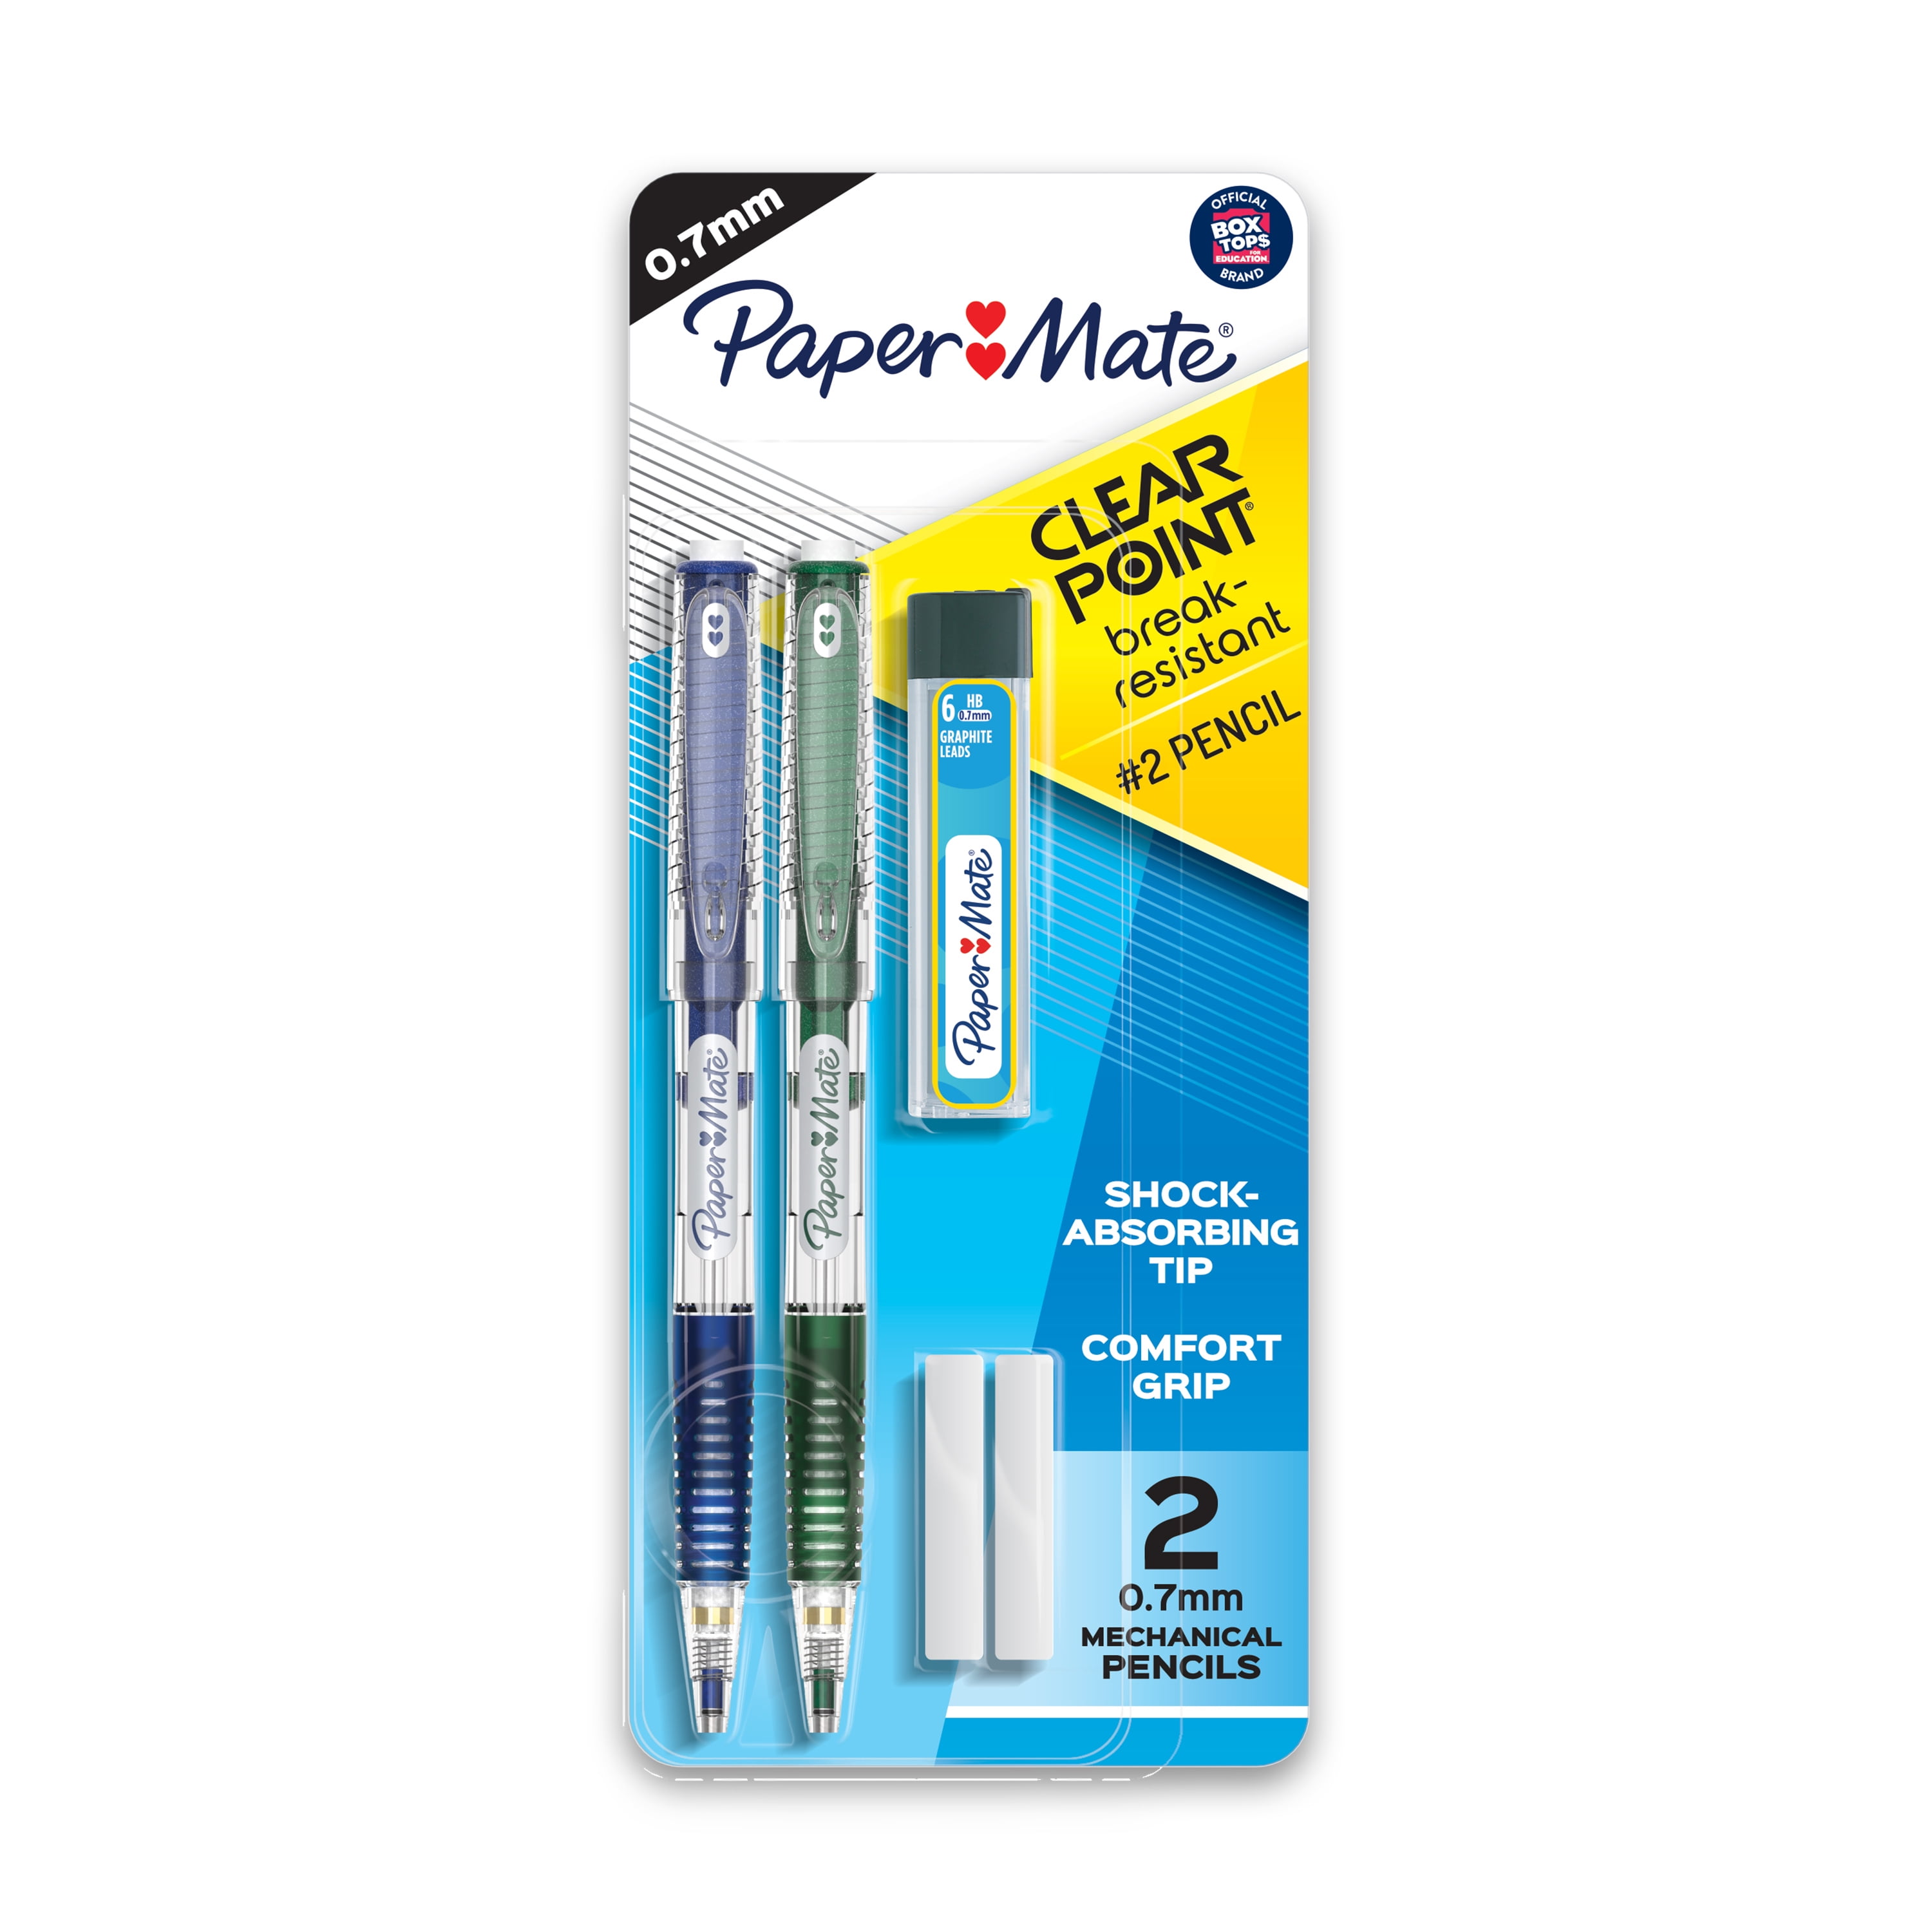 Black Barrel Refillable 0.7 mm Paper Mate Clearpoint Mechanical Pencil 2 Pack 